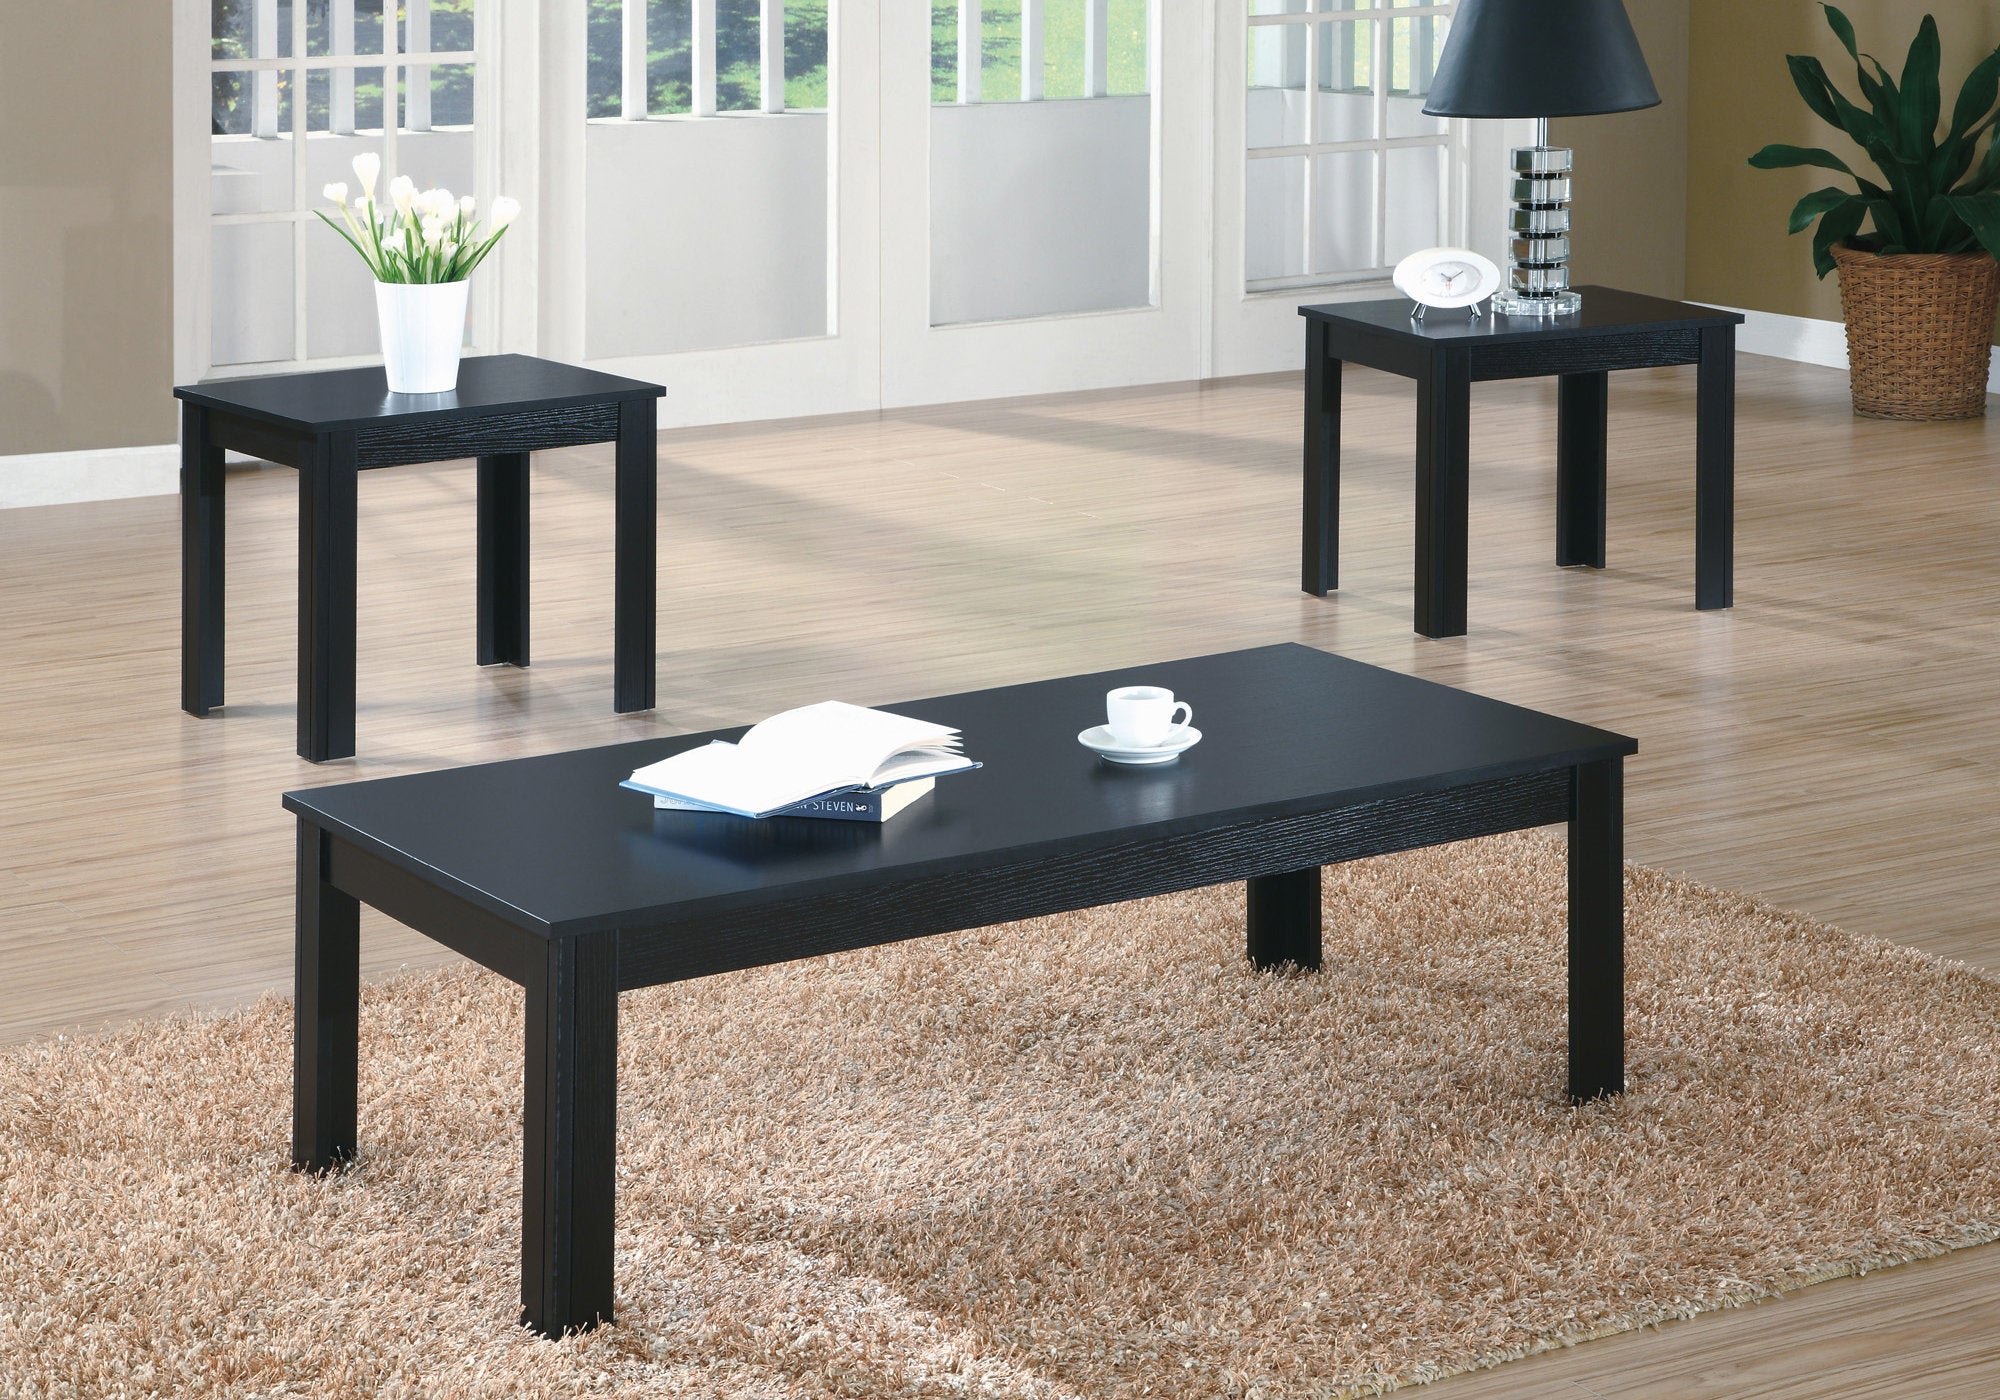 MN-497840P    Table Set, 3Pcs Set, Coffee, End, Side, Accent, Living Room, Laminate, Laminate, Black, Contemporary, Modern